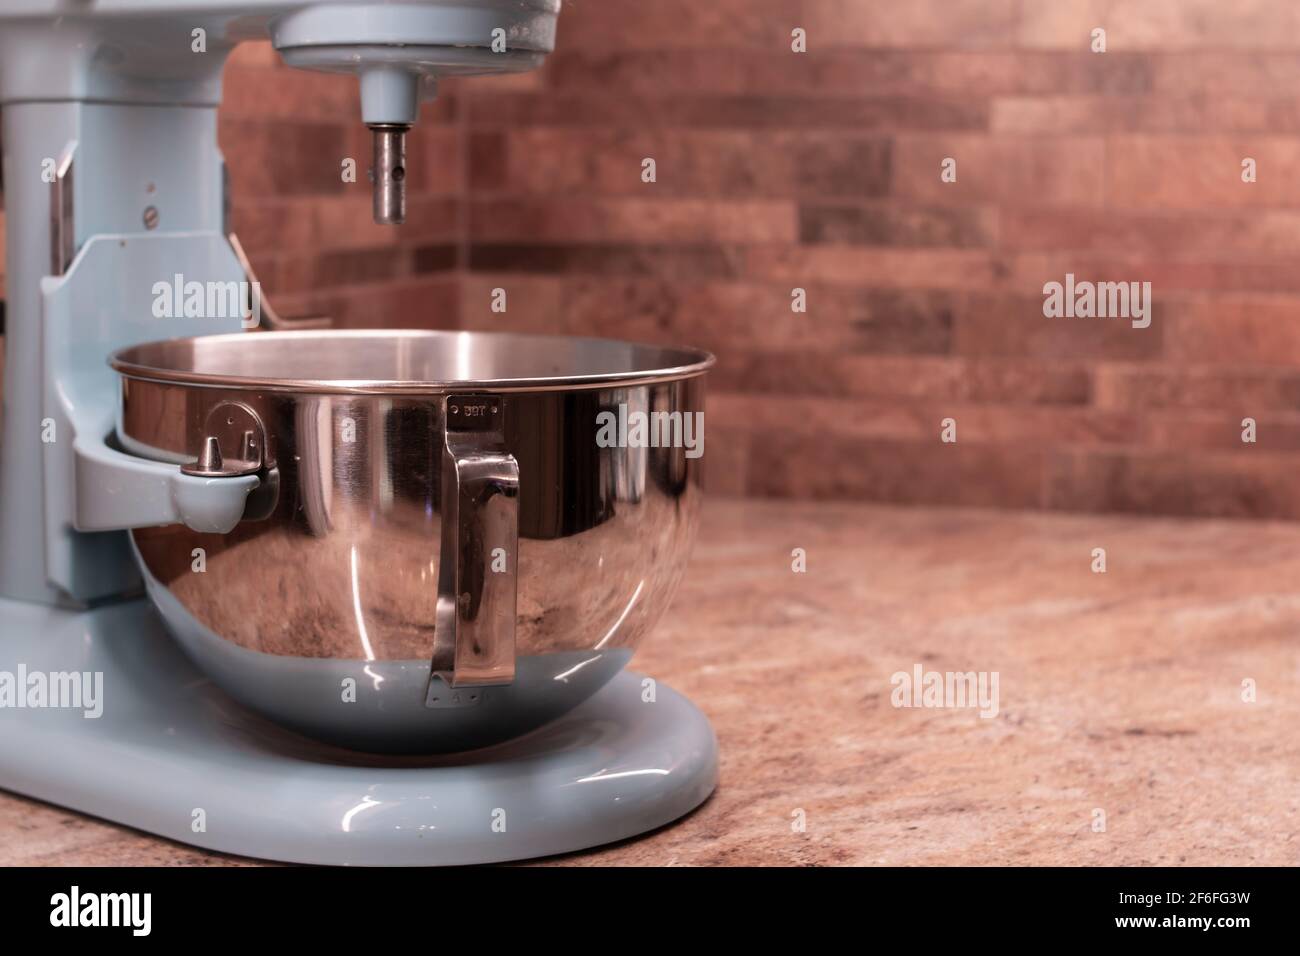 Turquoise stand mixer against a terracotta tile backsplash, set on a marble kitchen countertop. Stock Photo